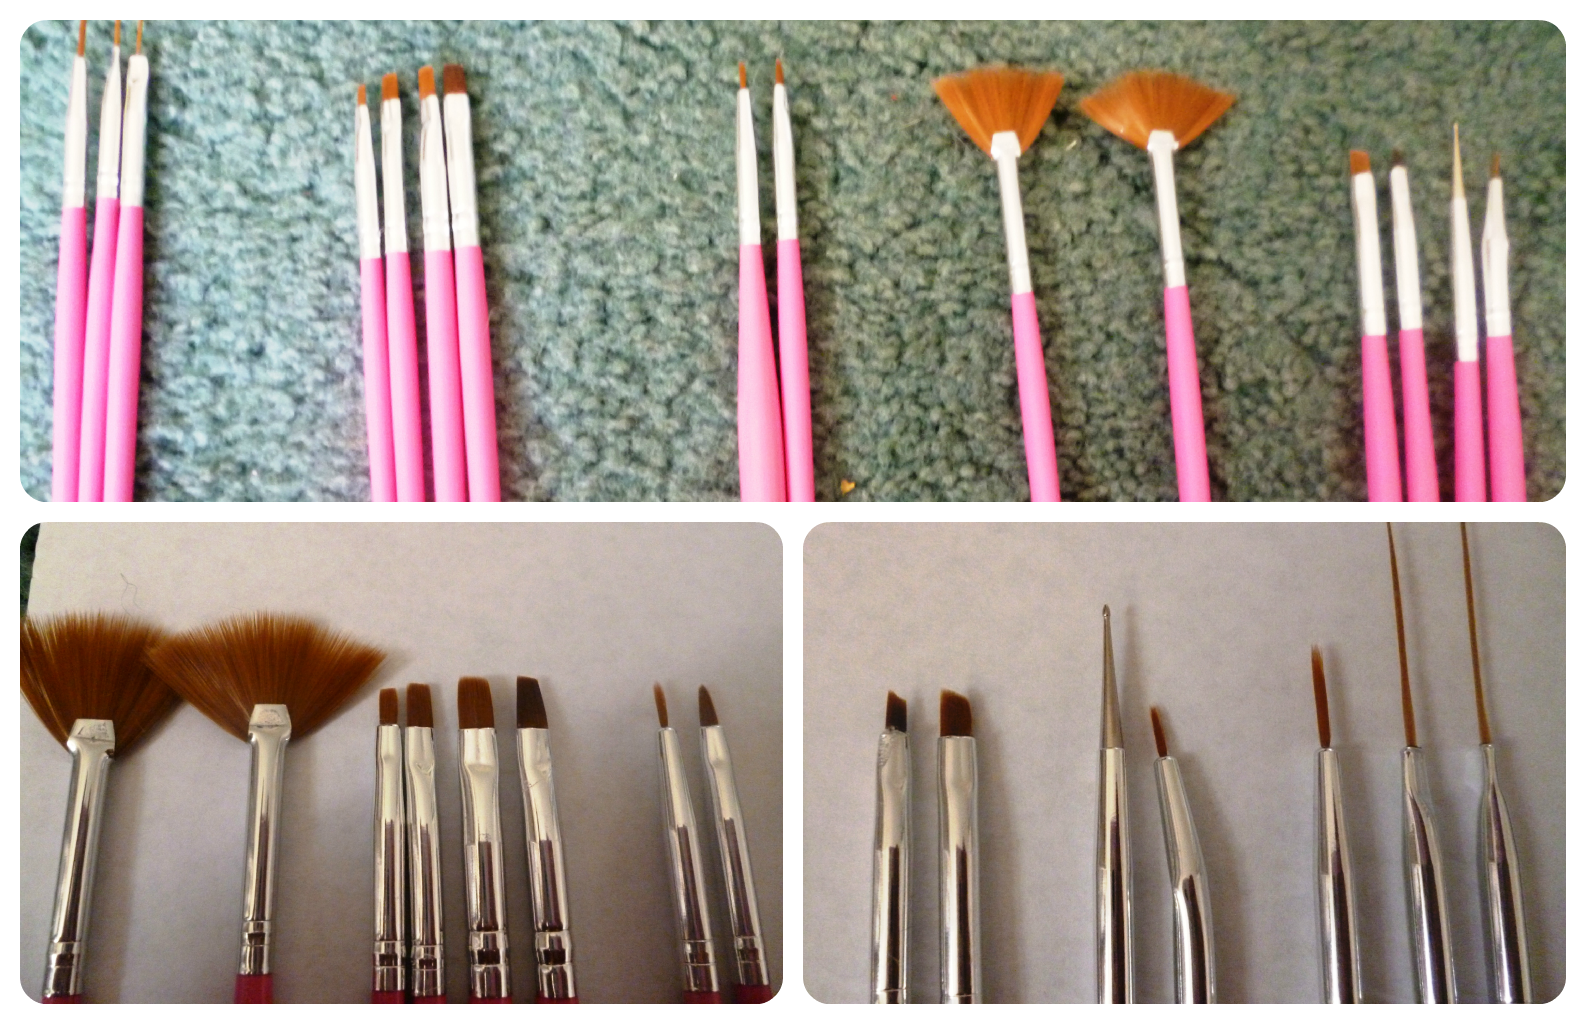 2. Nail Art Brushes - wide 2